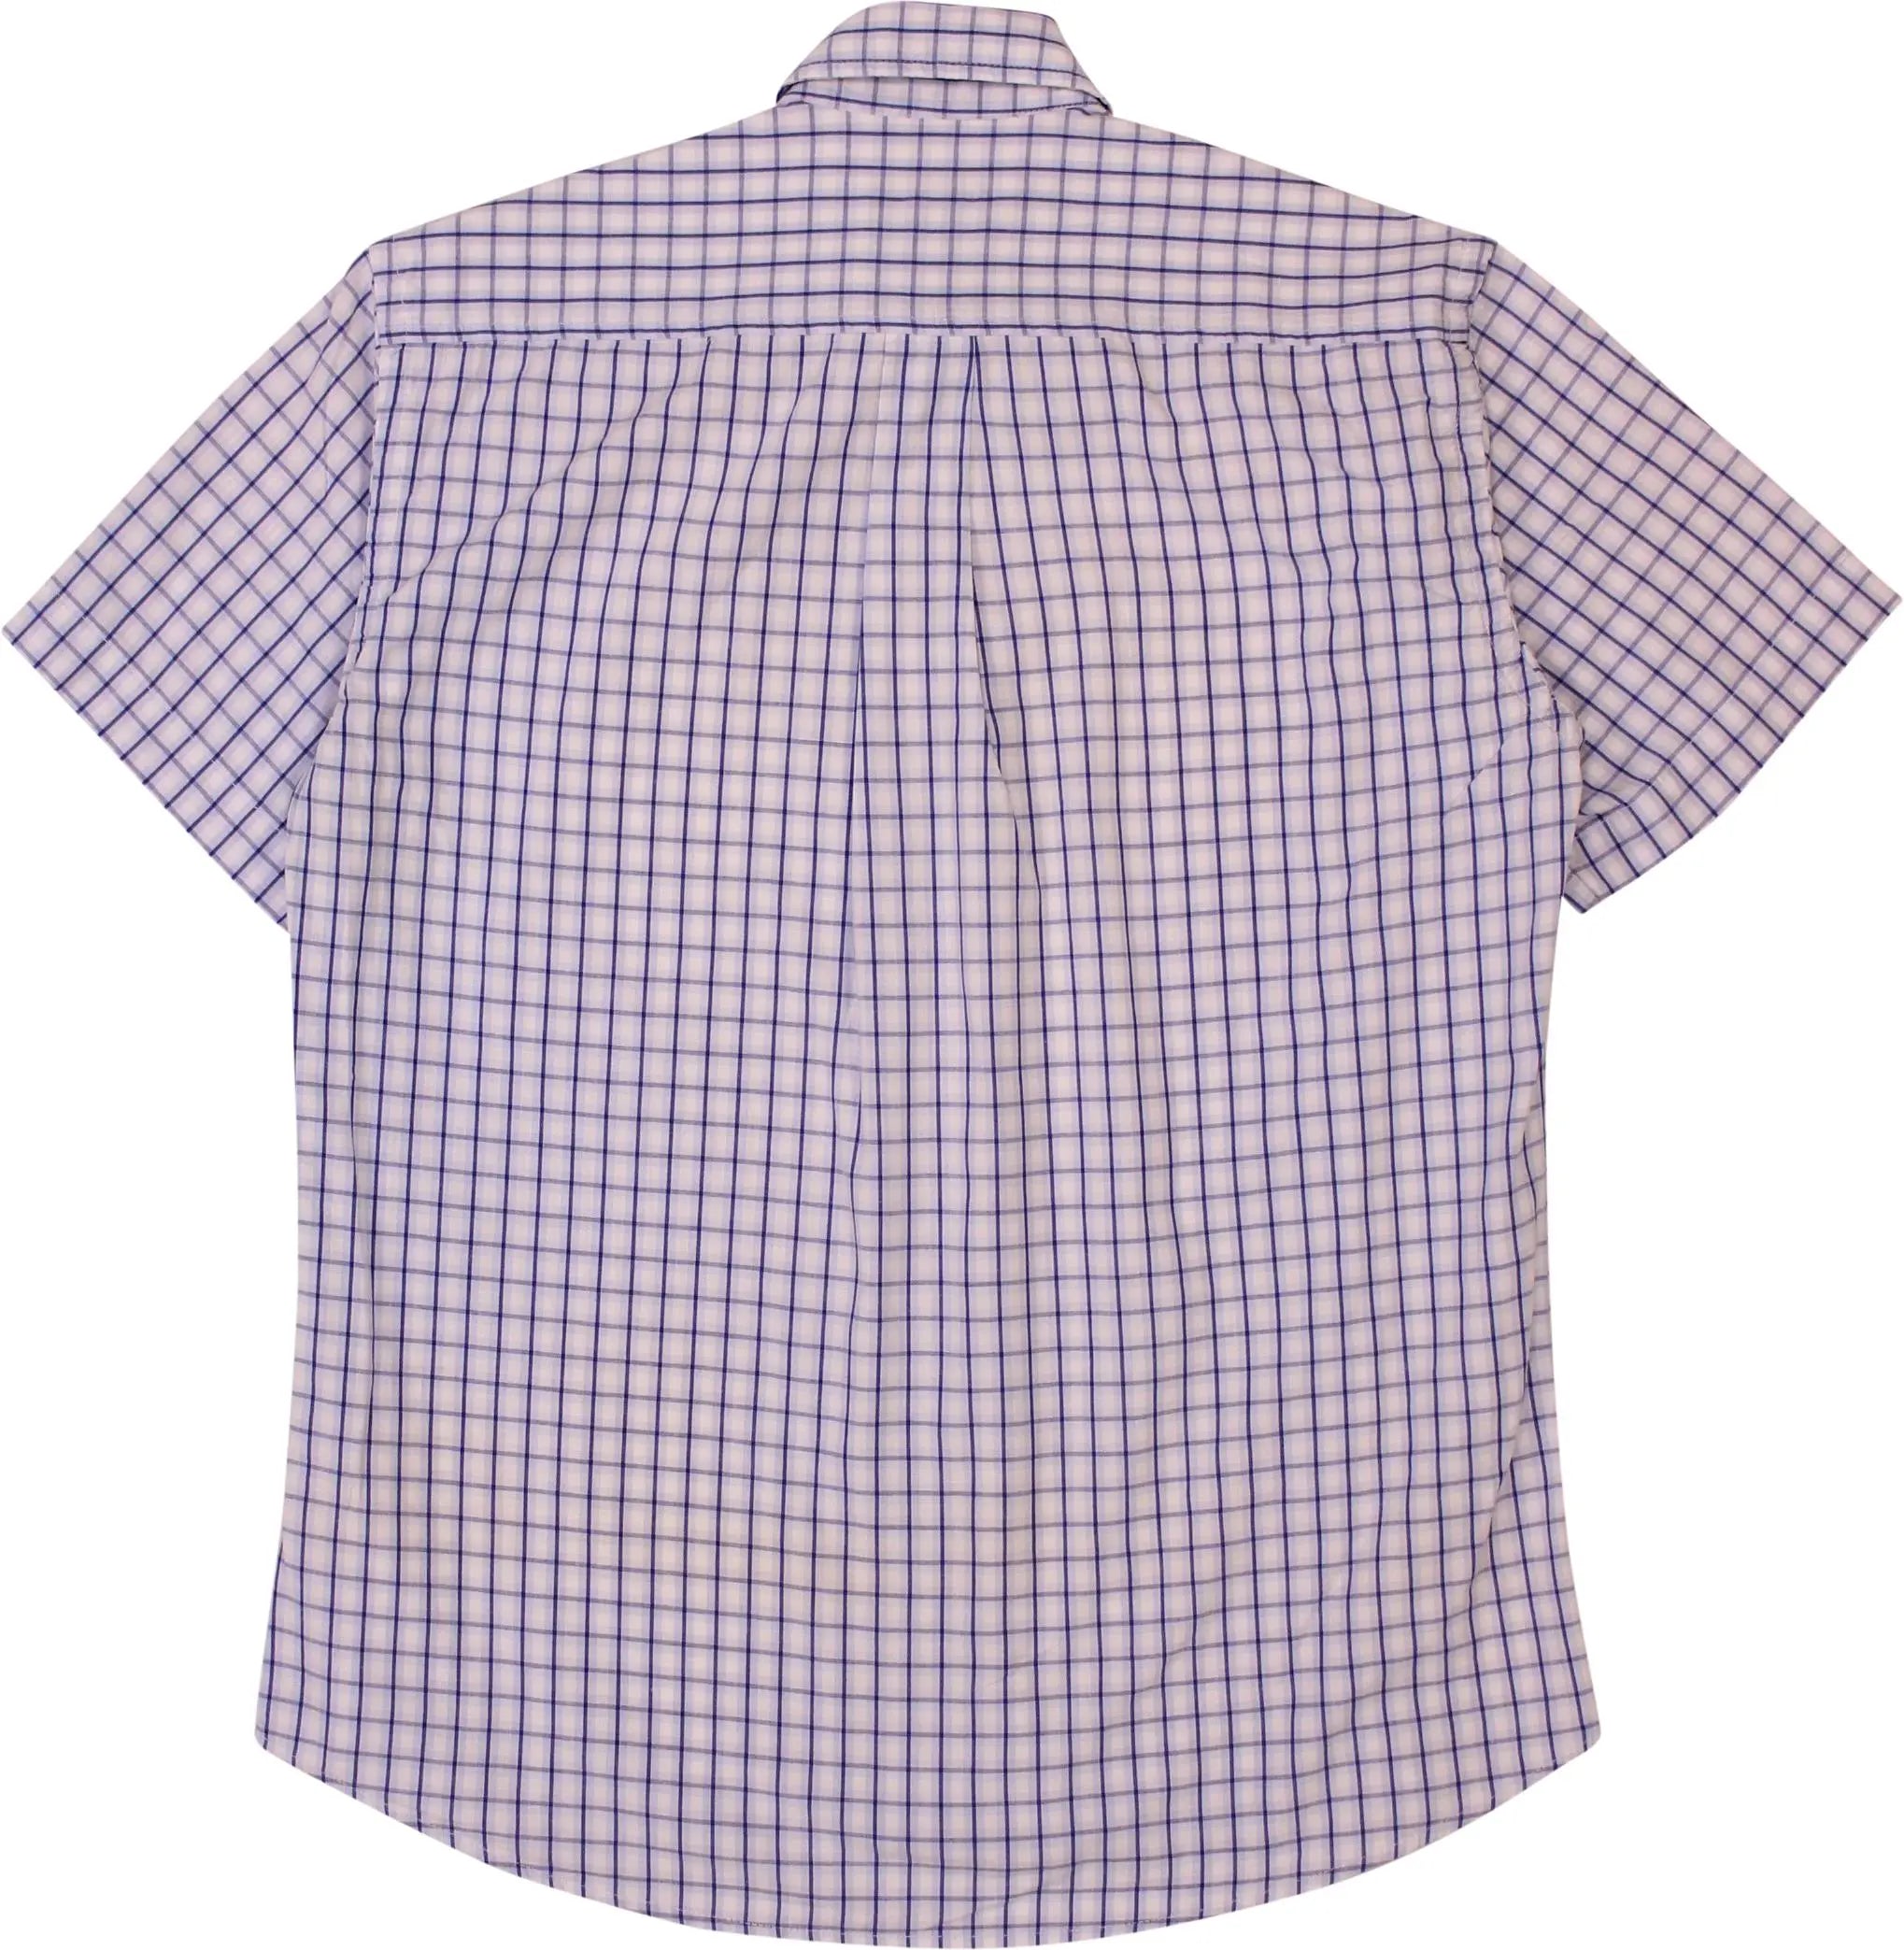 Kappa - Blue Checked Short Sleeve Shirt by Kappa- ThriftTale.com - Vintage and second handclothing